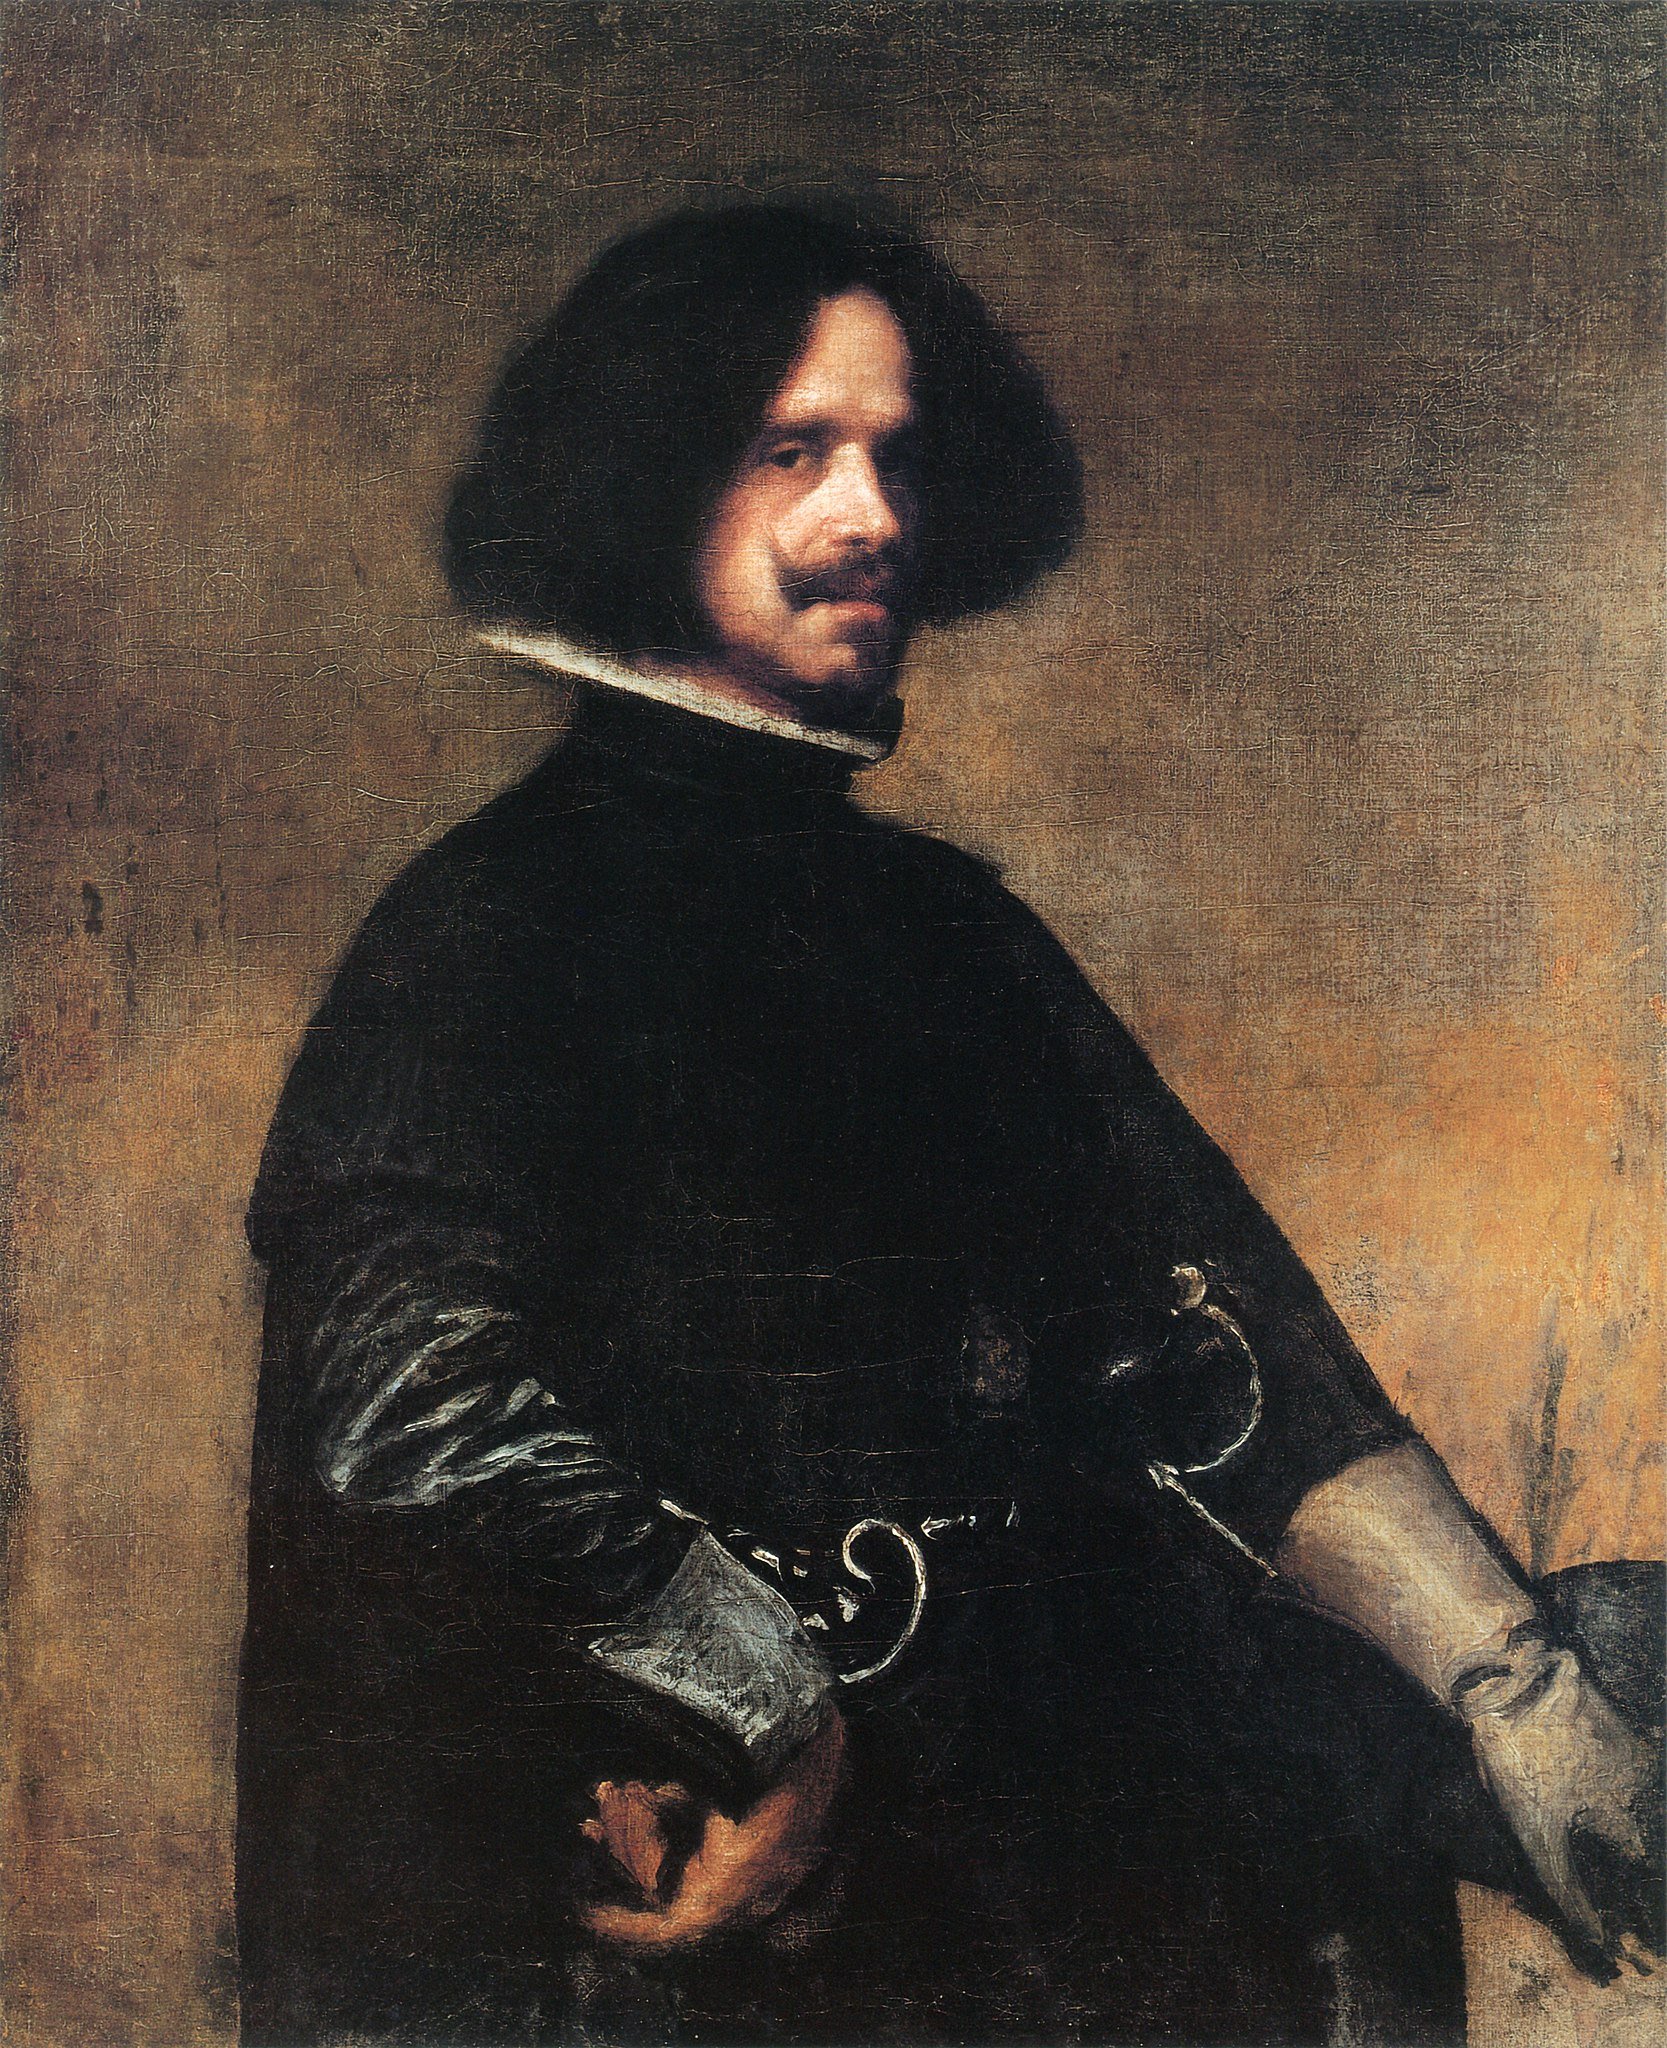 Diego Velázquez's self-portrait portrays him in dark clothing, accessorized with a white glove, and featuring a distinguished mustache.